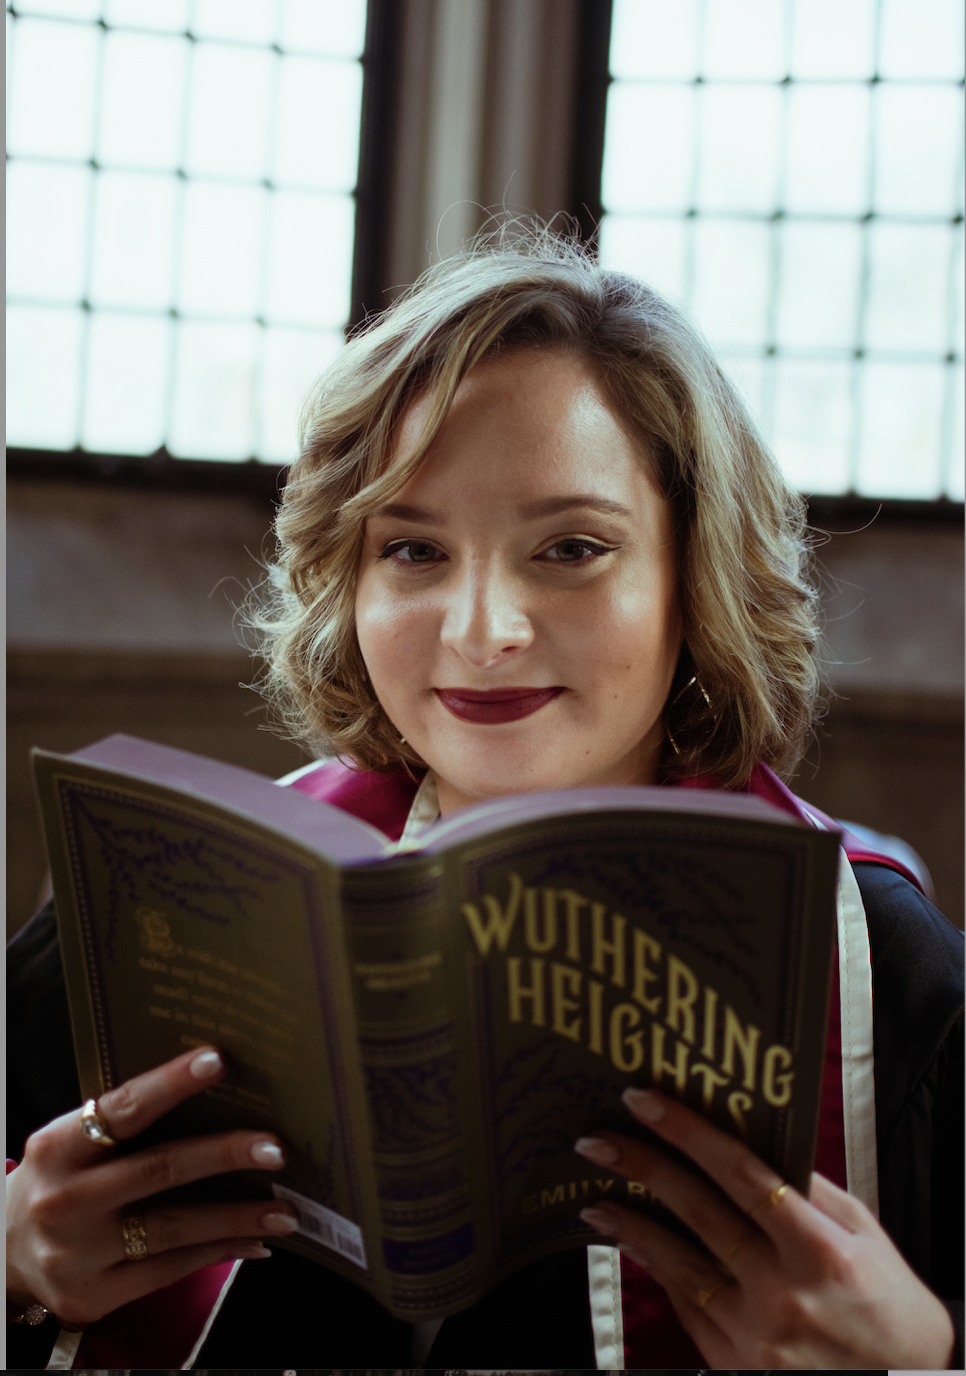 Photograph of Emily, wearing graduation robes and holding up a vintage copy of Wuthering Heights.